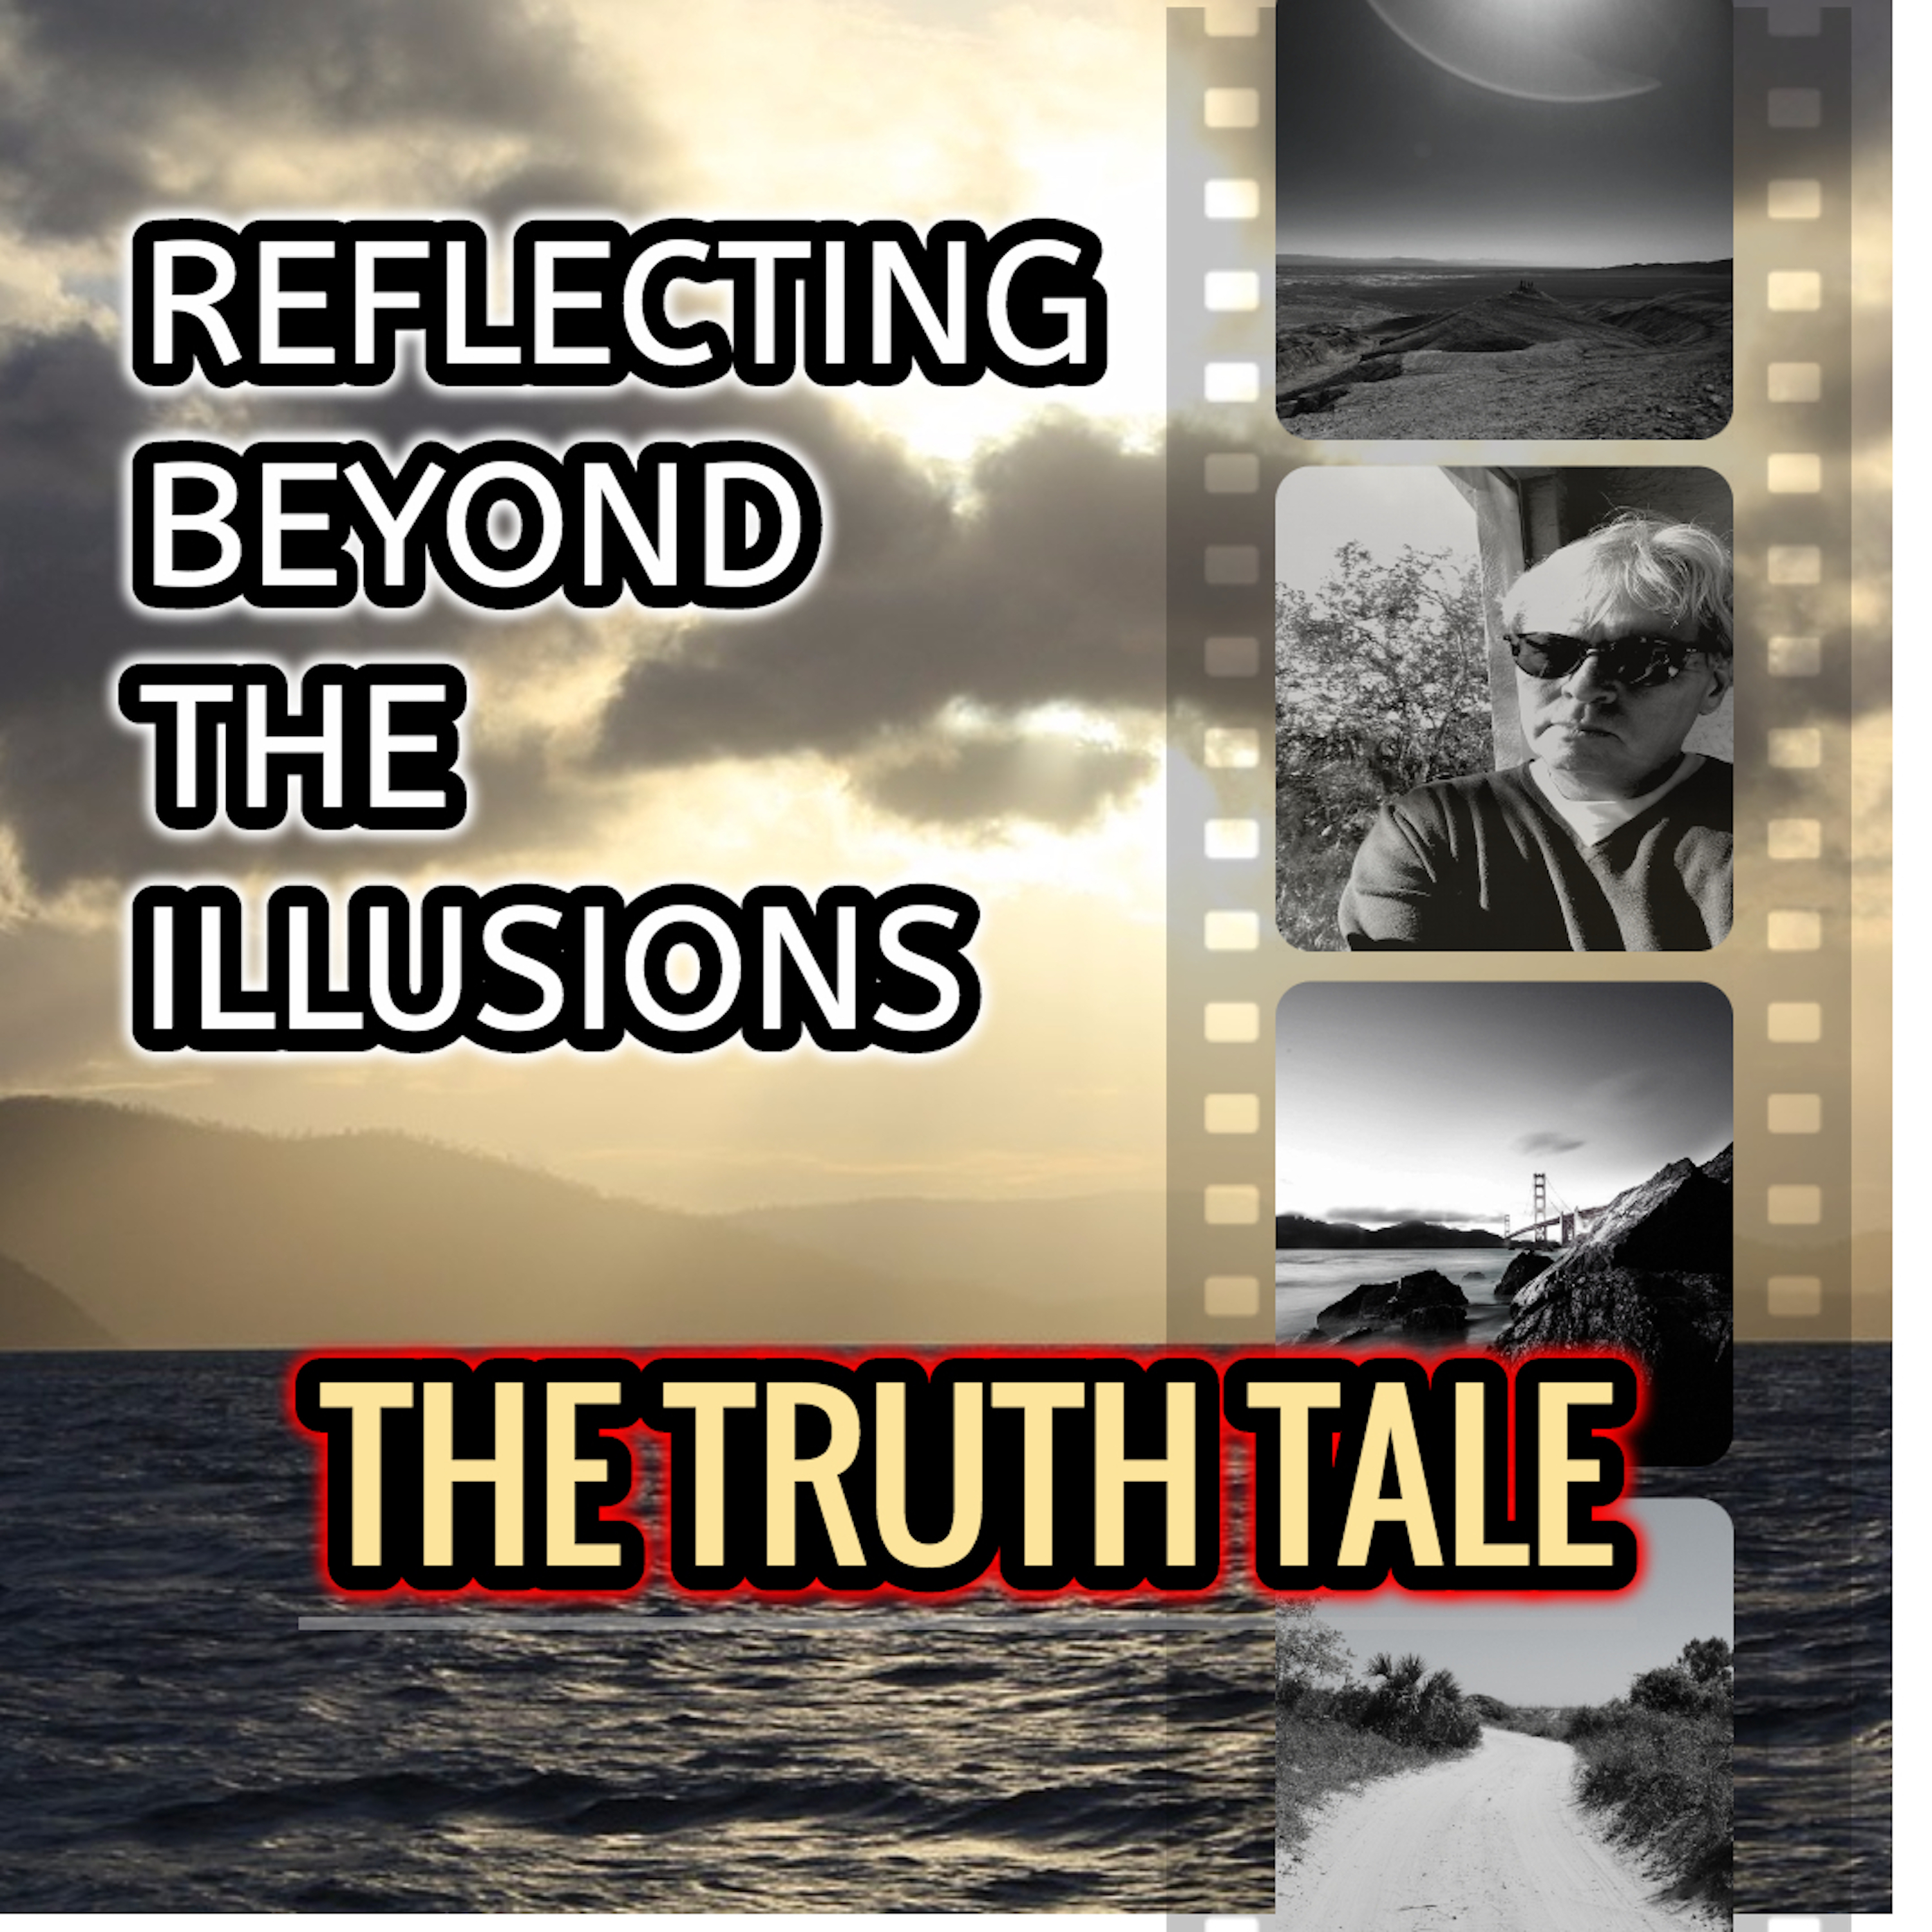 Press Release: New Album Release – Reflecting Beyond the Illusions by The Truth Tale